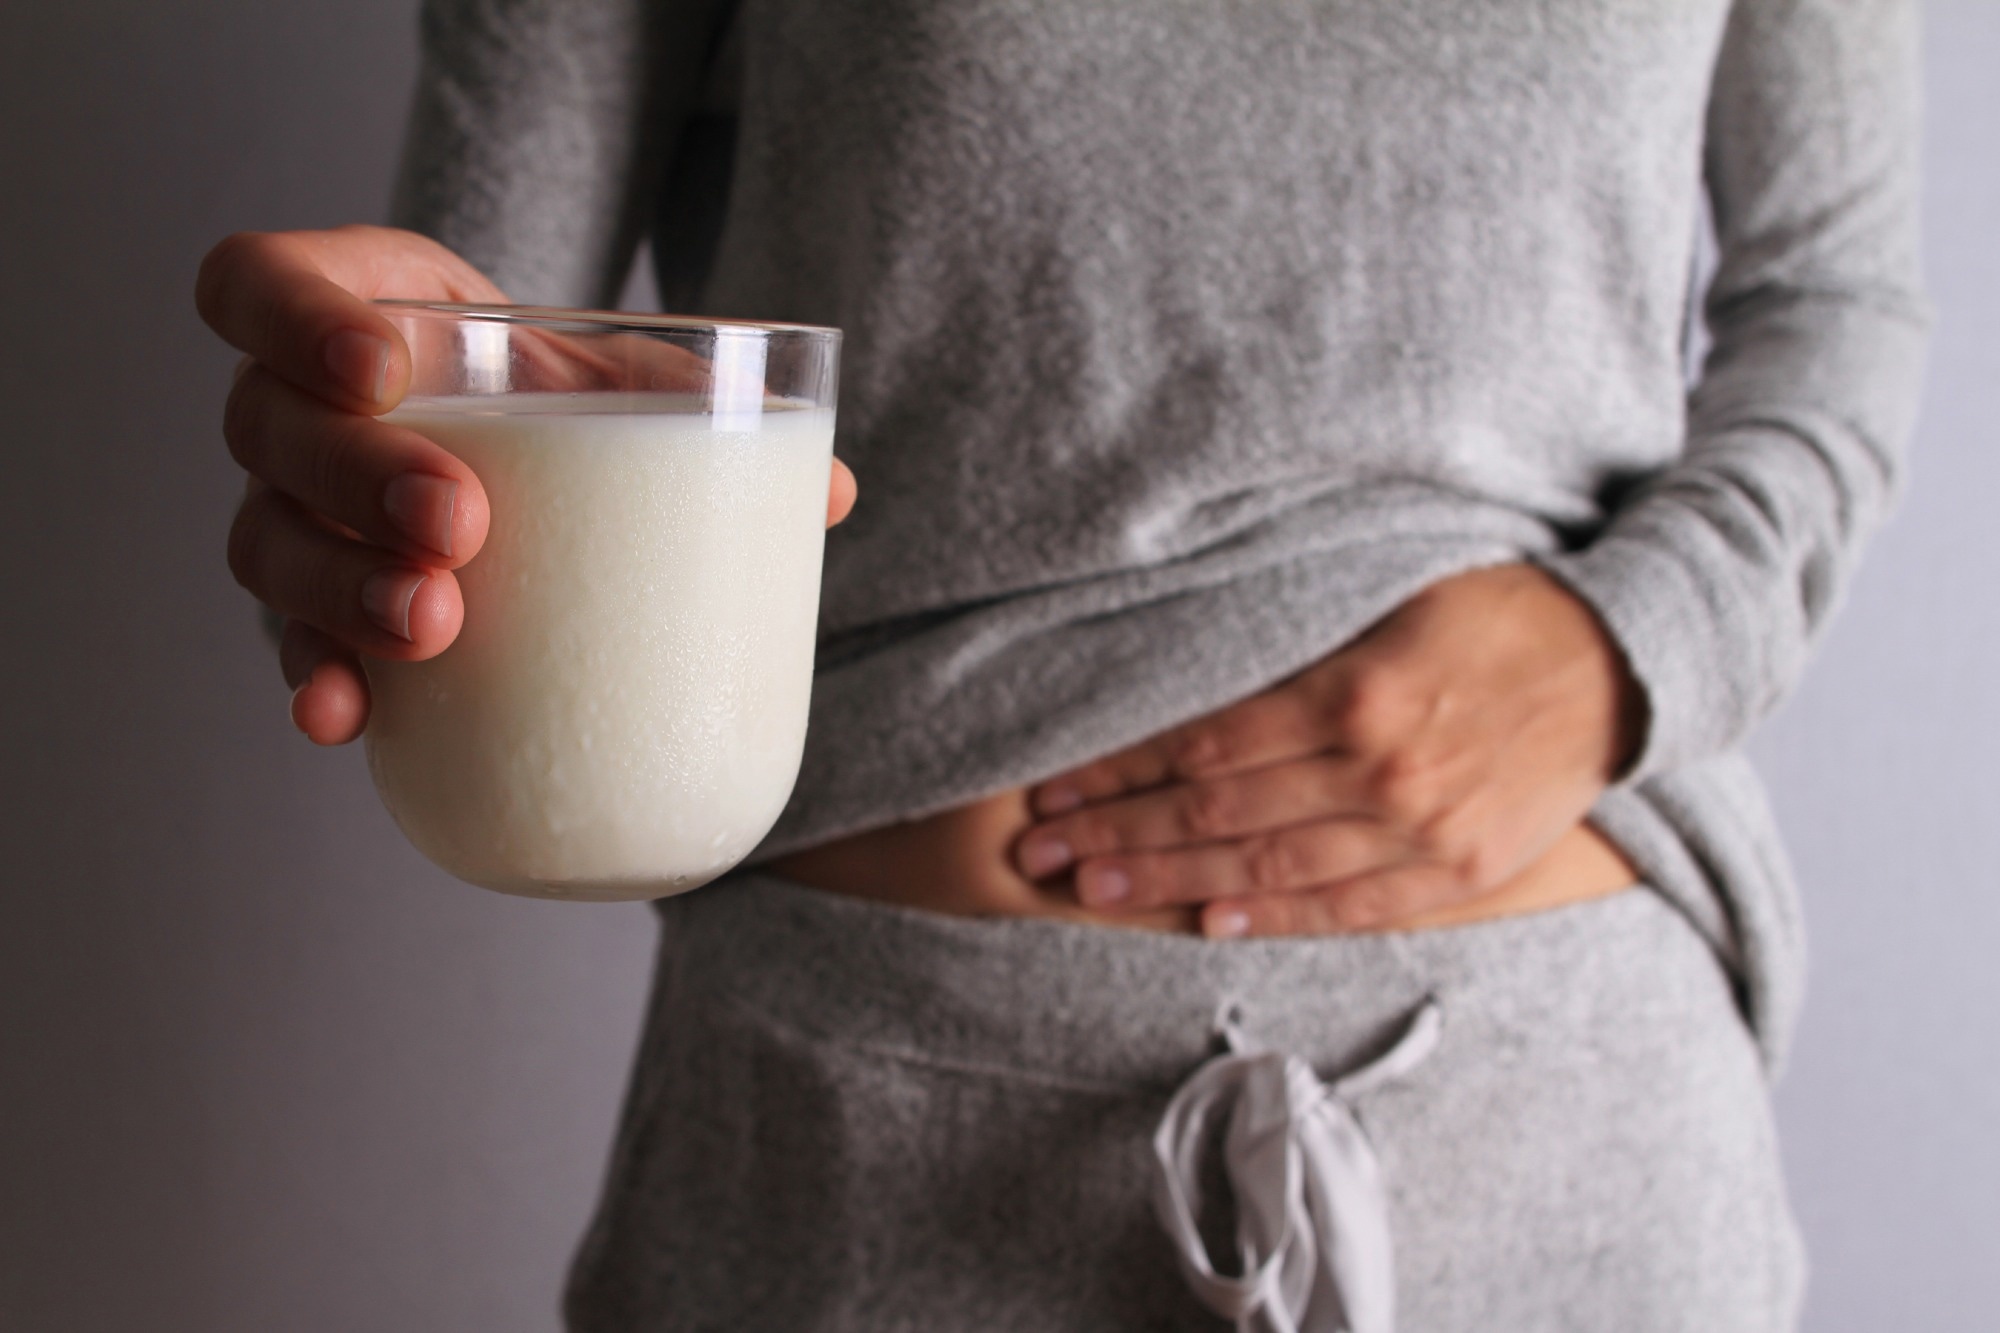 Study: Cow’s Milk: A Benefit for Human Health? Omics Tools and Precision Nutrition for Lactose Intolerance Management. Image Credit: Albina Gavrilovic/Shutterstock.com